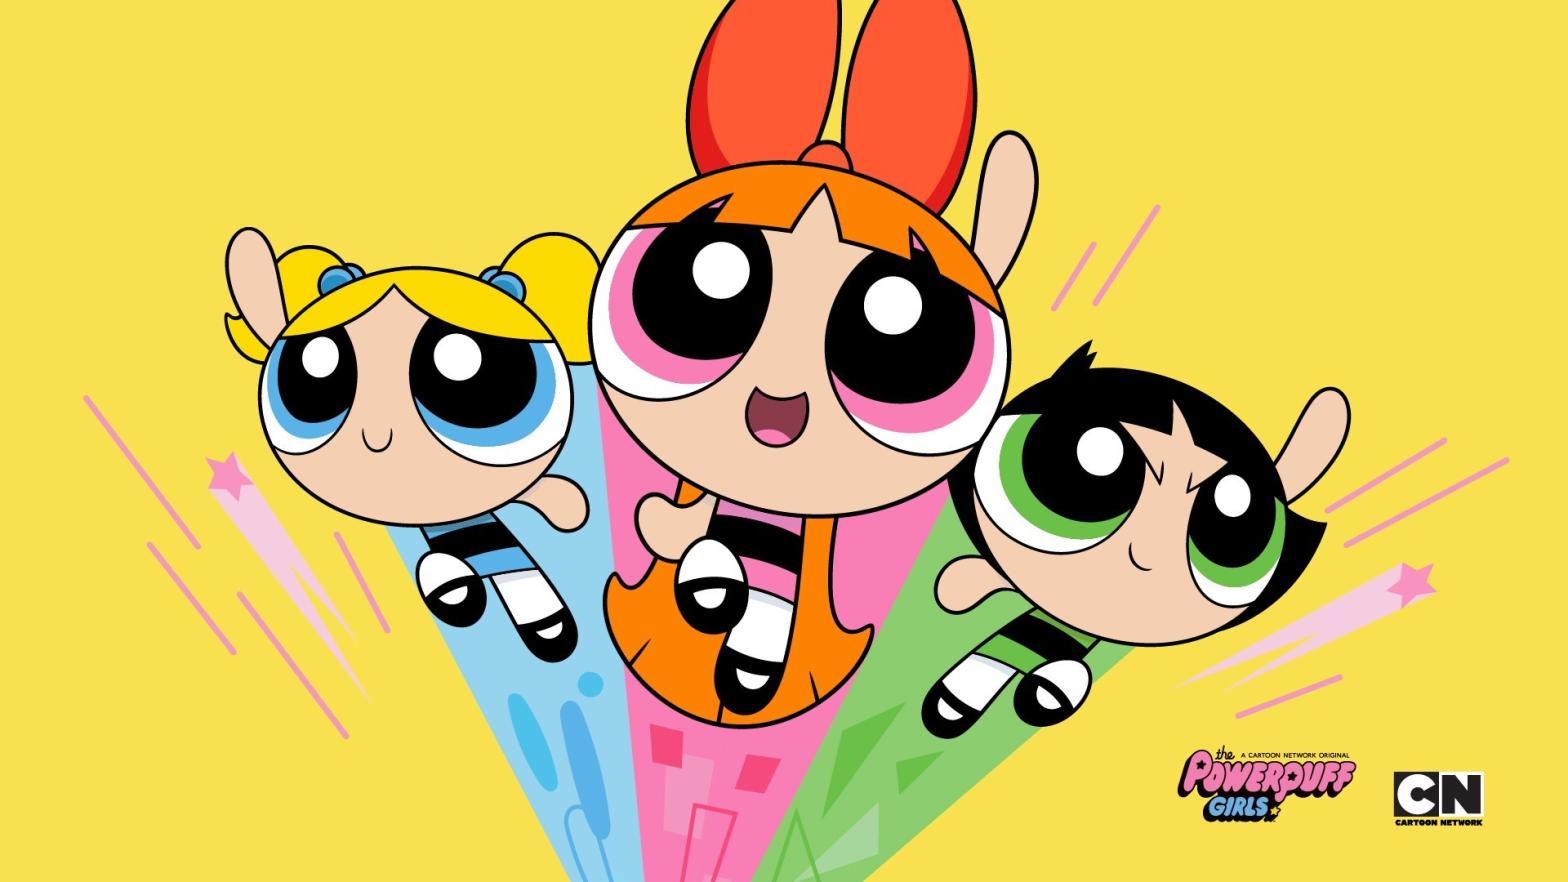 The Powerpuff Girls could be coming back. (Image: Cartoon Network)